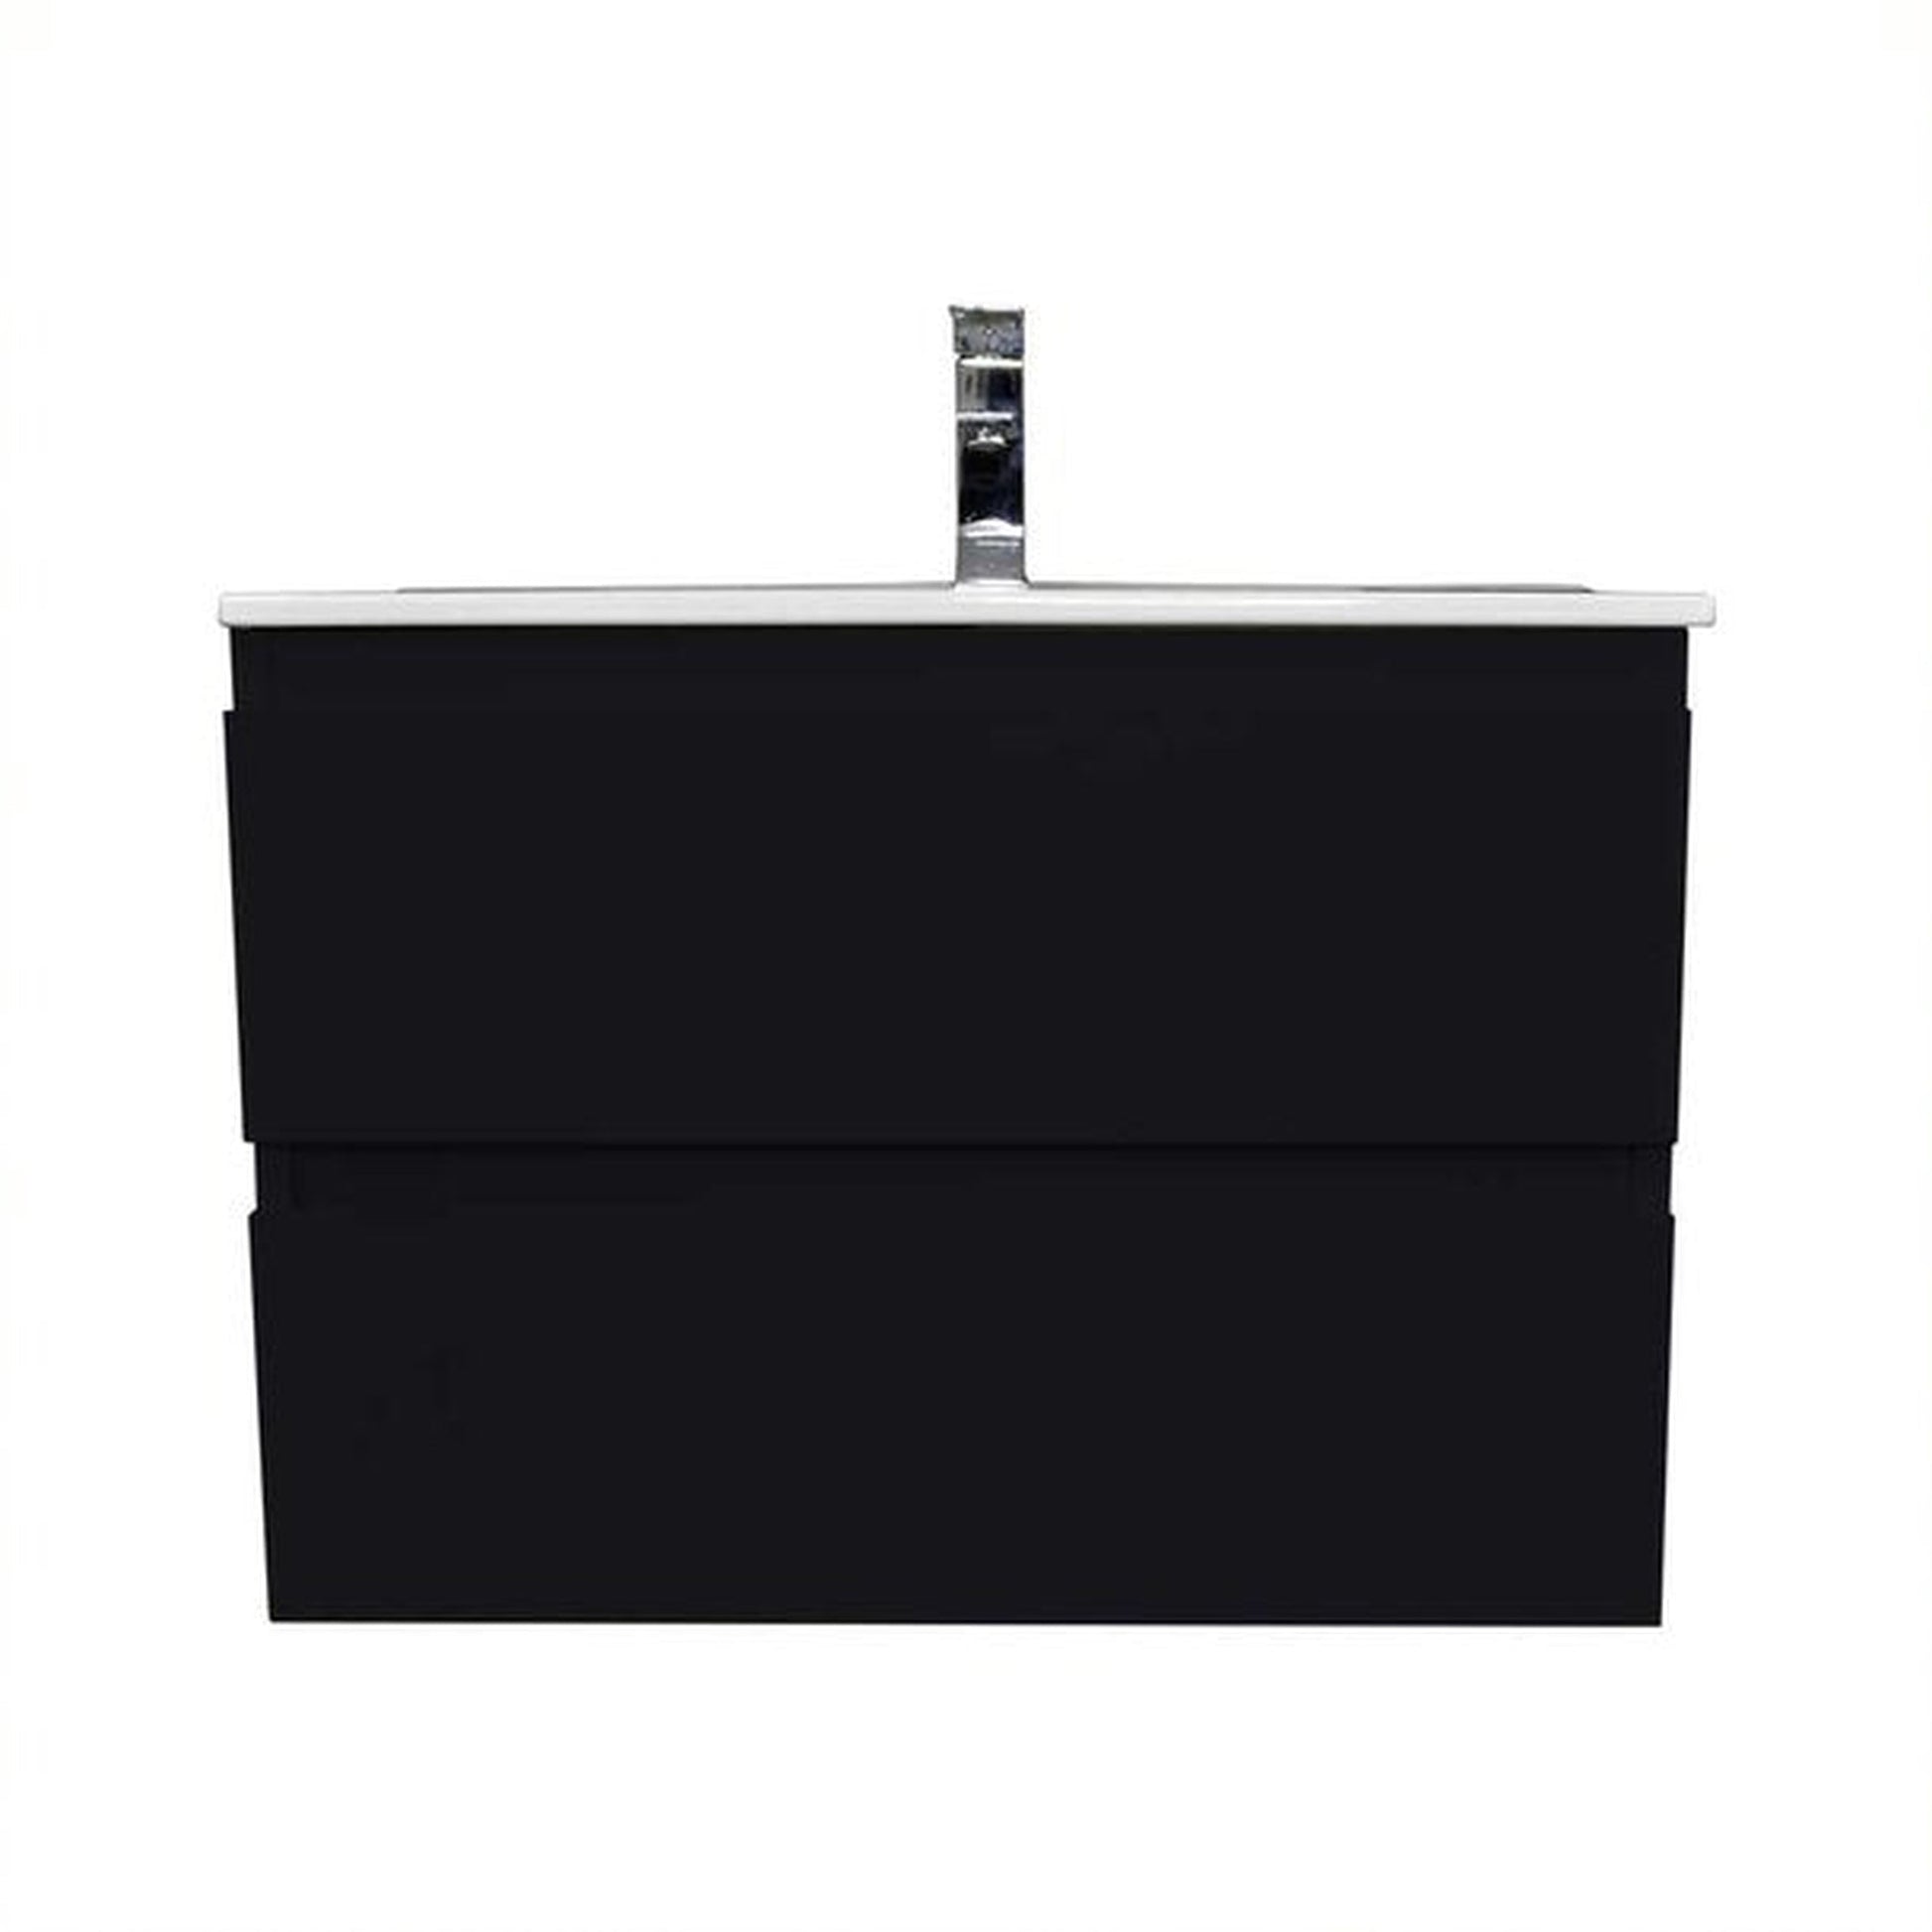 Volpa USA Salt 30" x 18" Black Wall-Mounted Floating Bathroom Vanity With Drawers, Integrated Porcelain Ceramic Top and Integrated Ceramic Sink